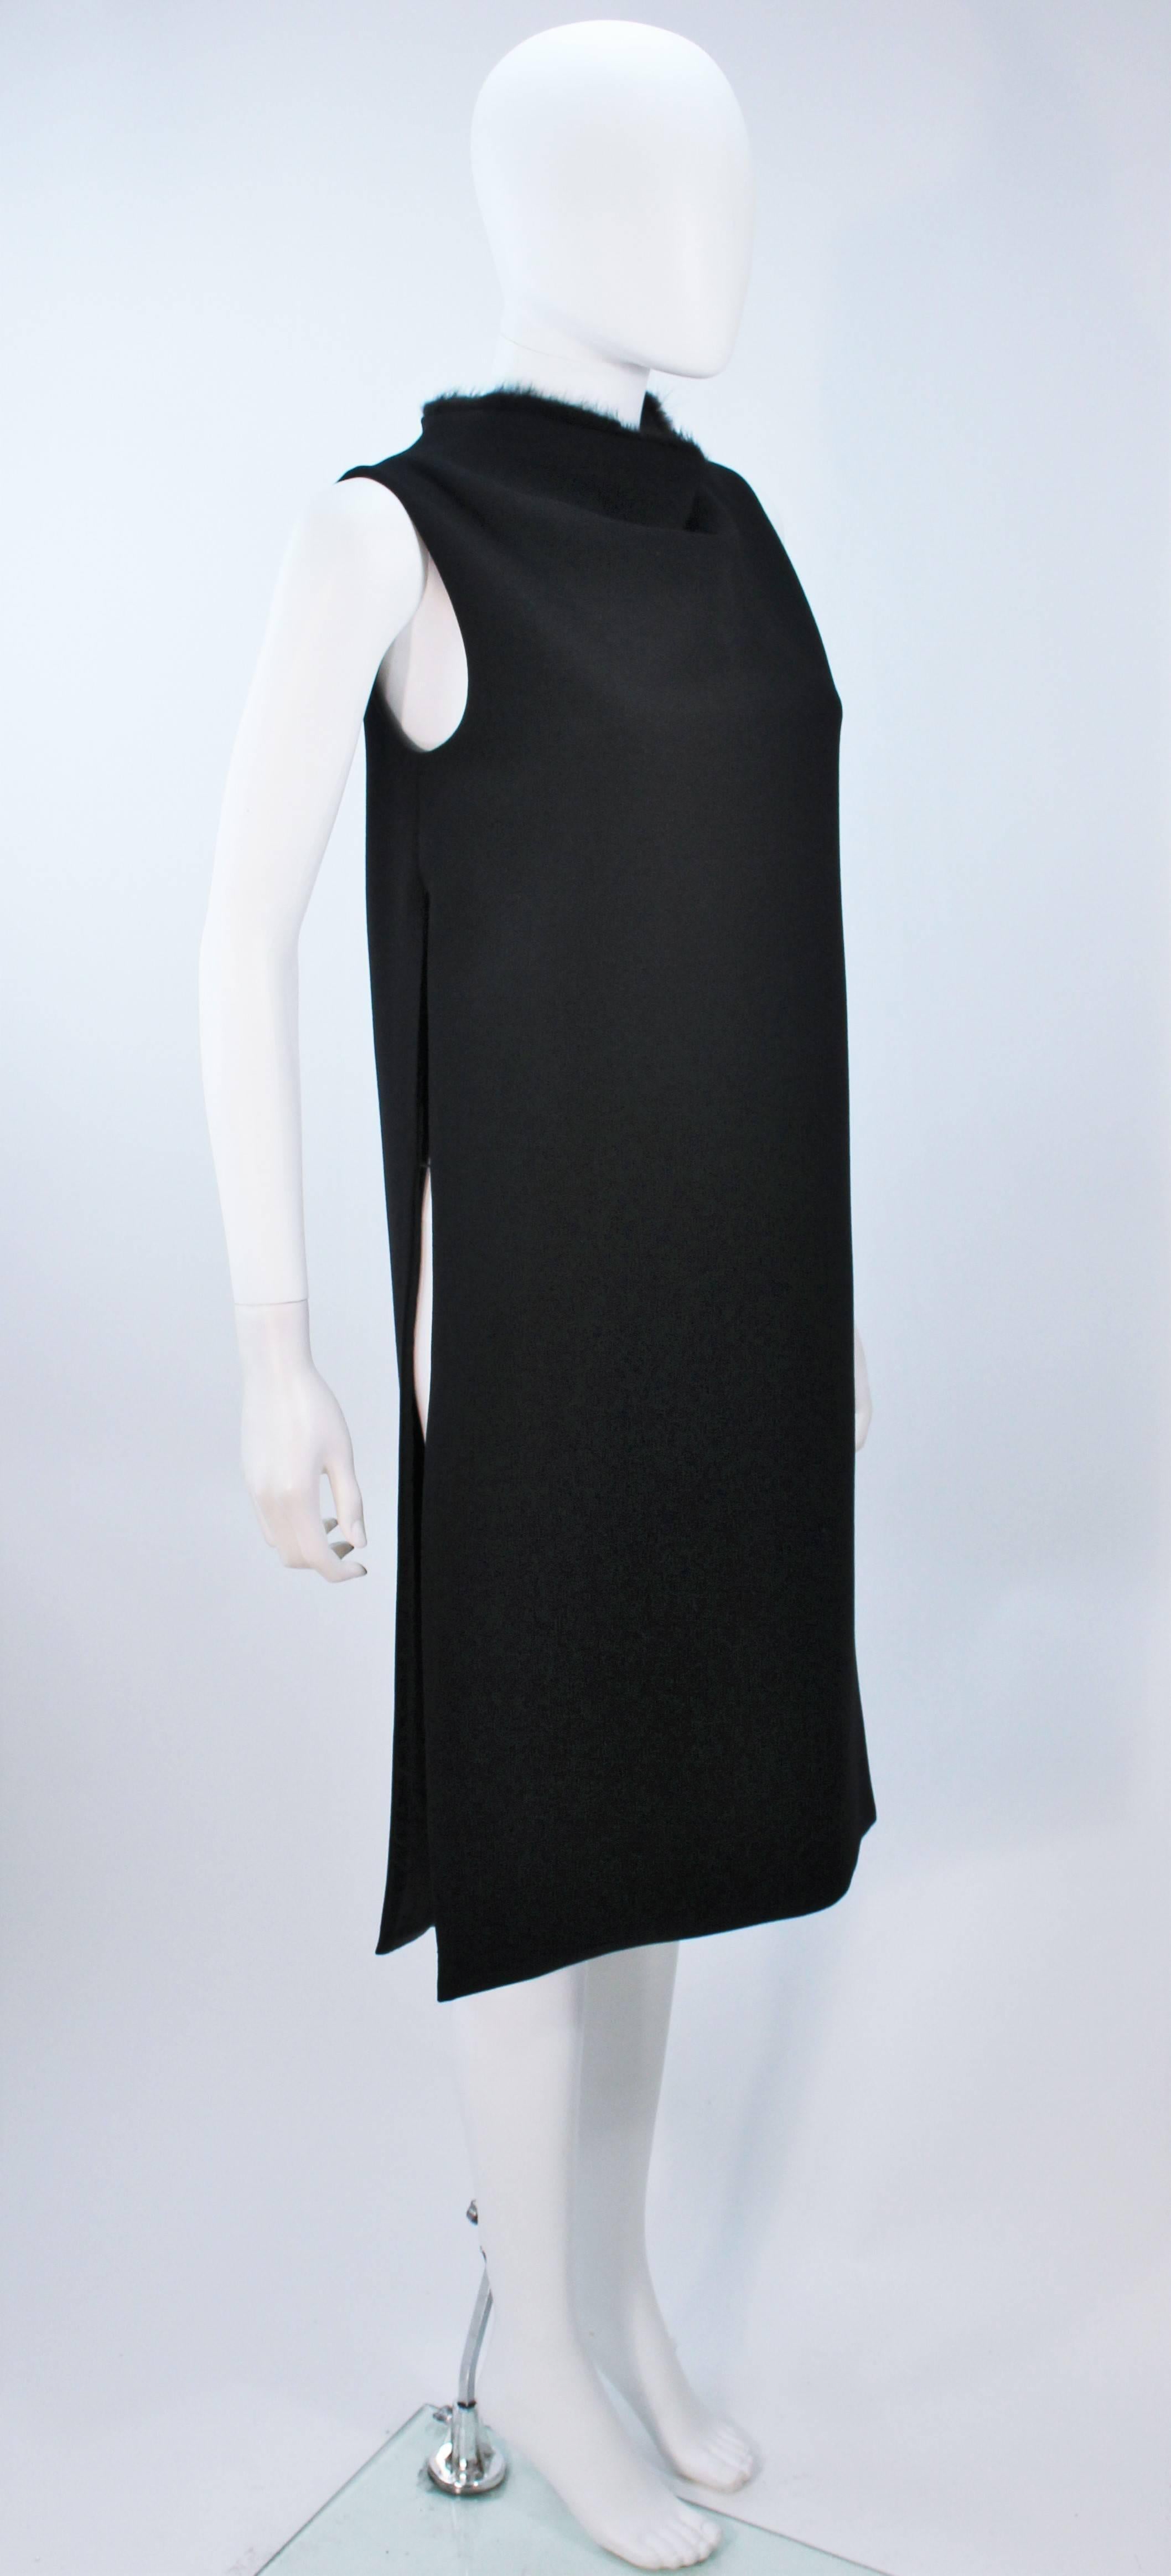 GIANNI VERSACE Black Wool Tunic Dress with Mink Collar and Open Sides Size 4-6 1